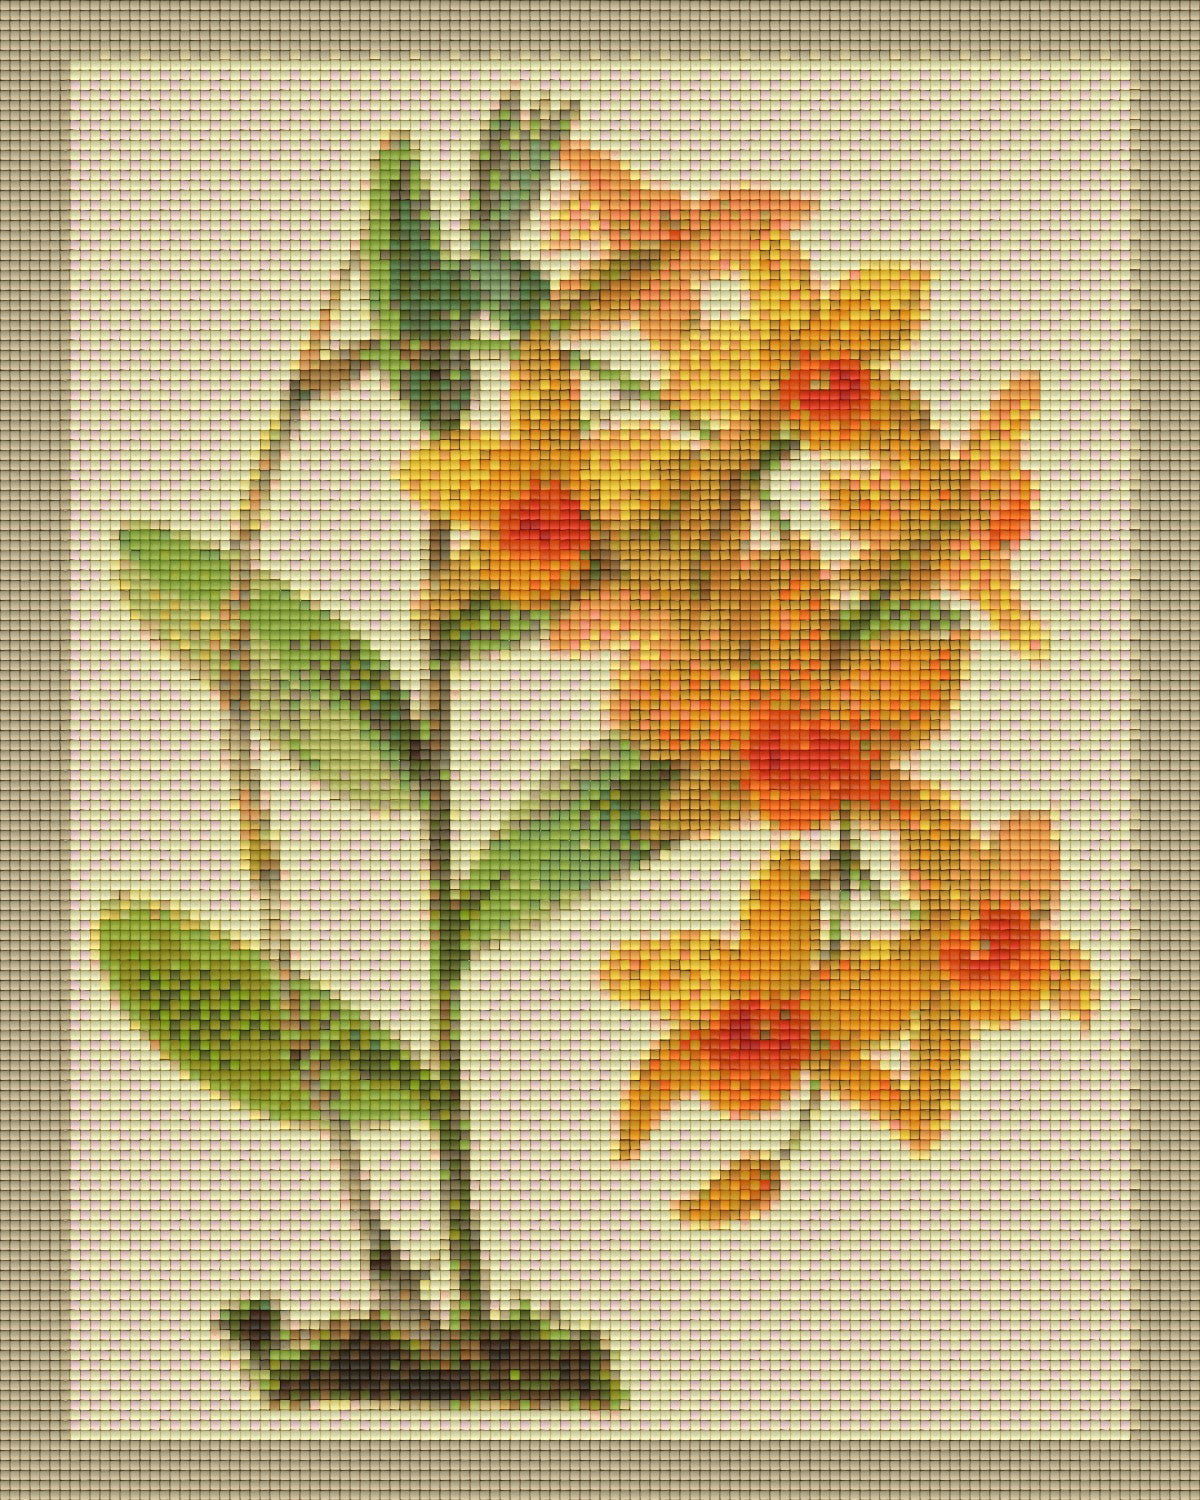 Pixelhobby classic set - orchid branch in a frame